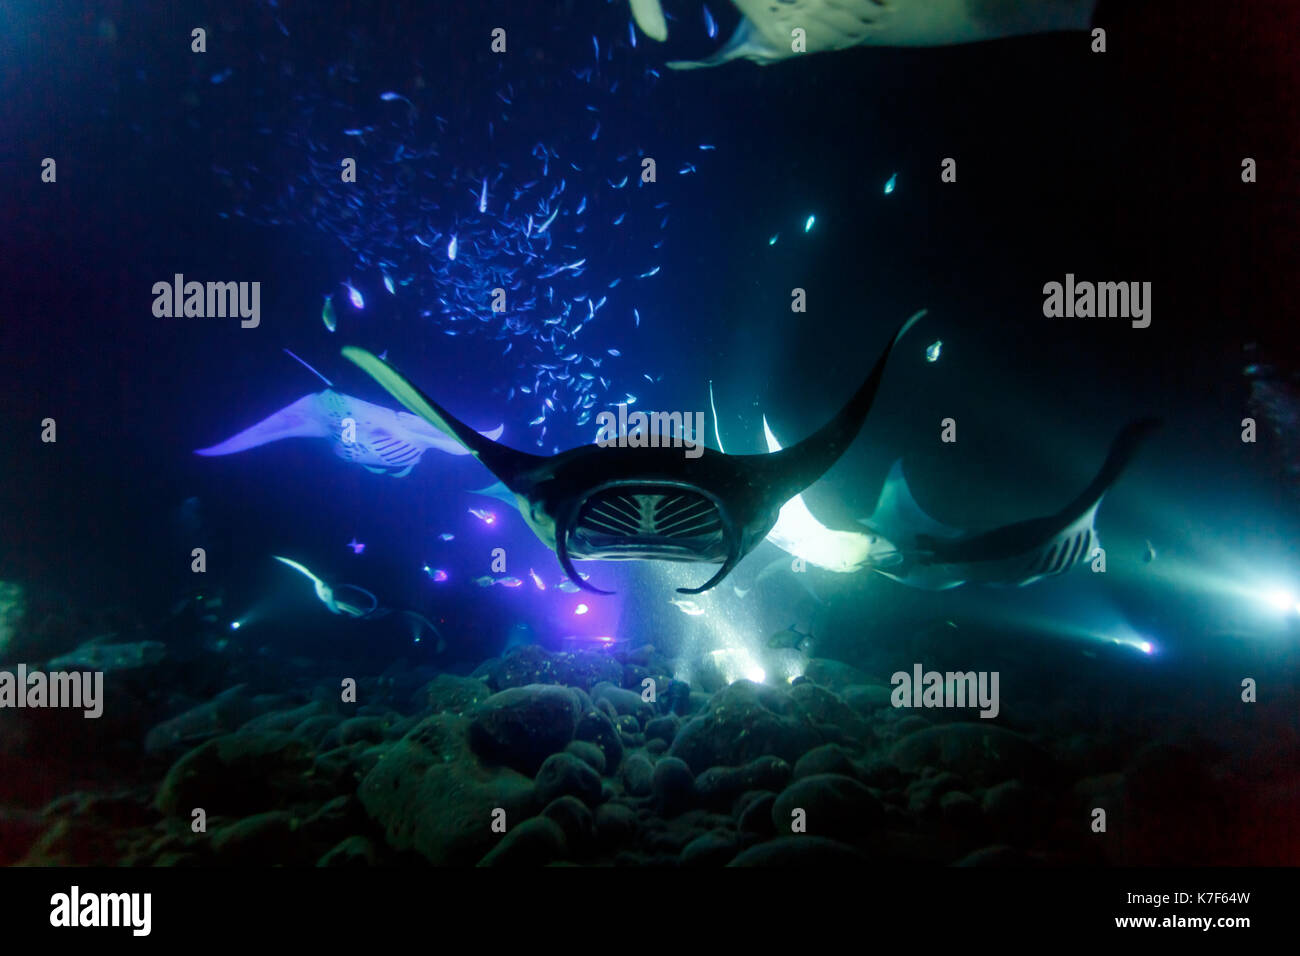 Colorful closeup of giant manta ray at night in tropical waters Stock Photo